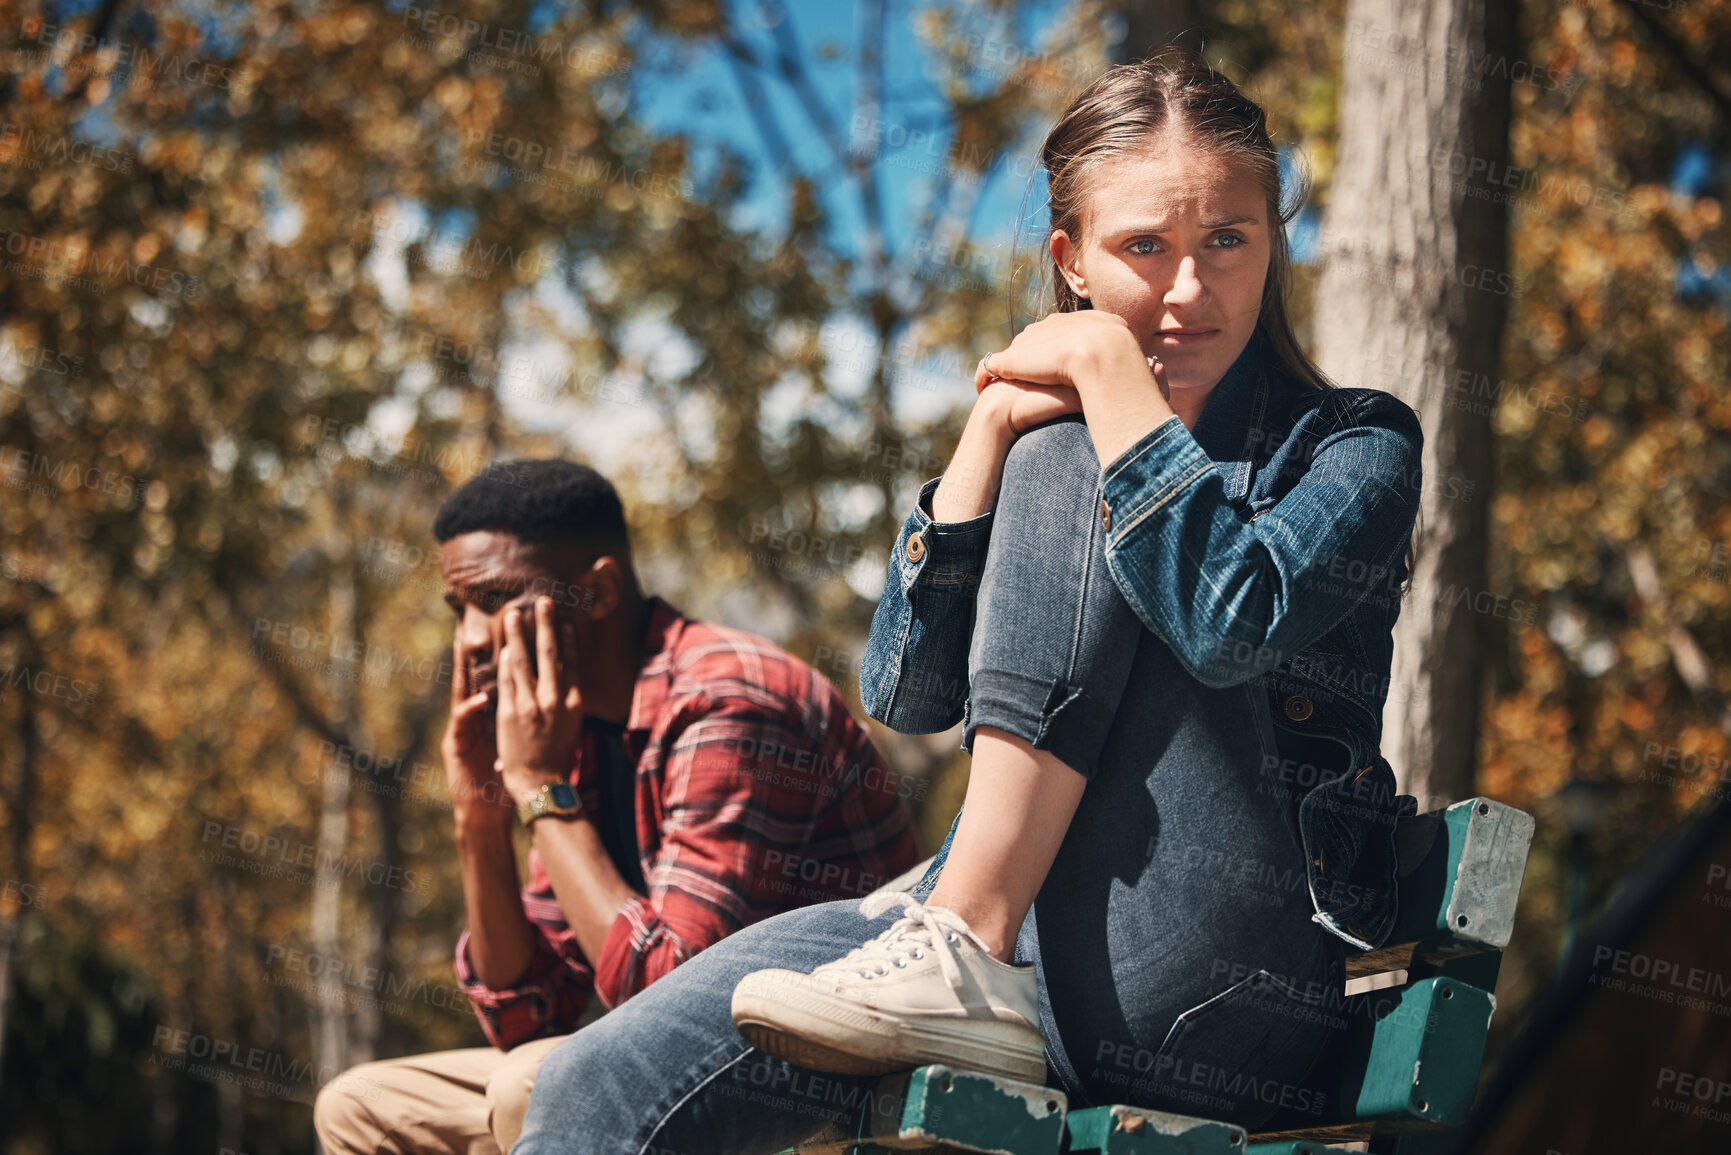 Buy stock photo Hiking, conflict and couple argue in a forest, annoyed and sad while sitting, lost and unhappy. Sad, woman and man arguing while hiking in nature, upset and angry, disappointment and breakup, trouble